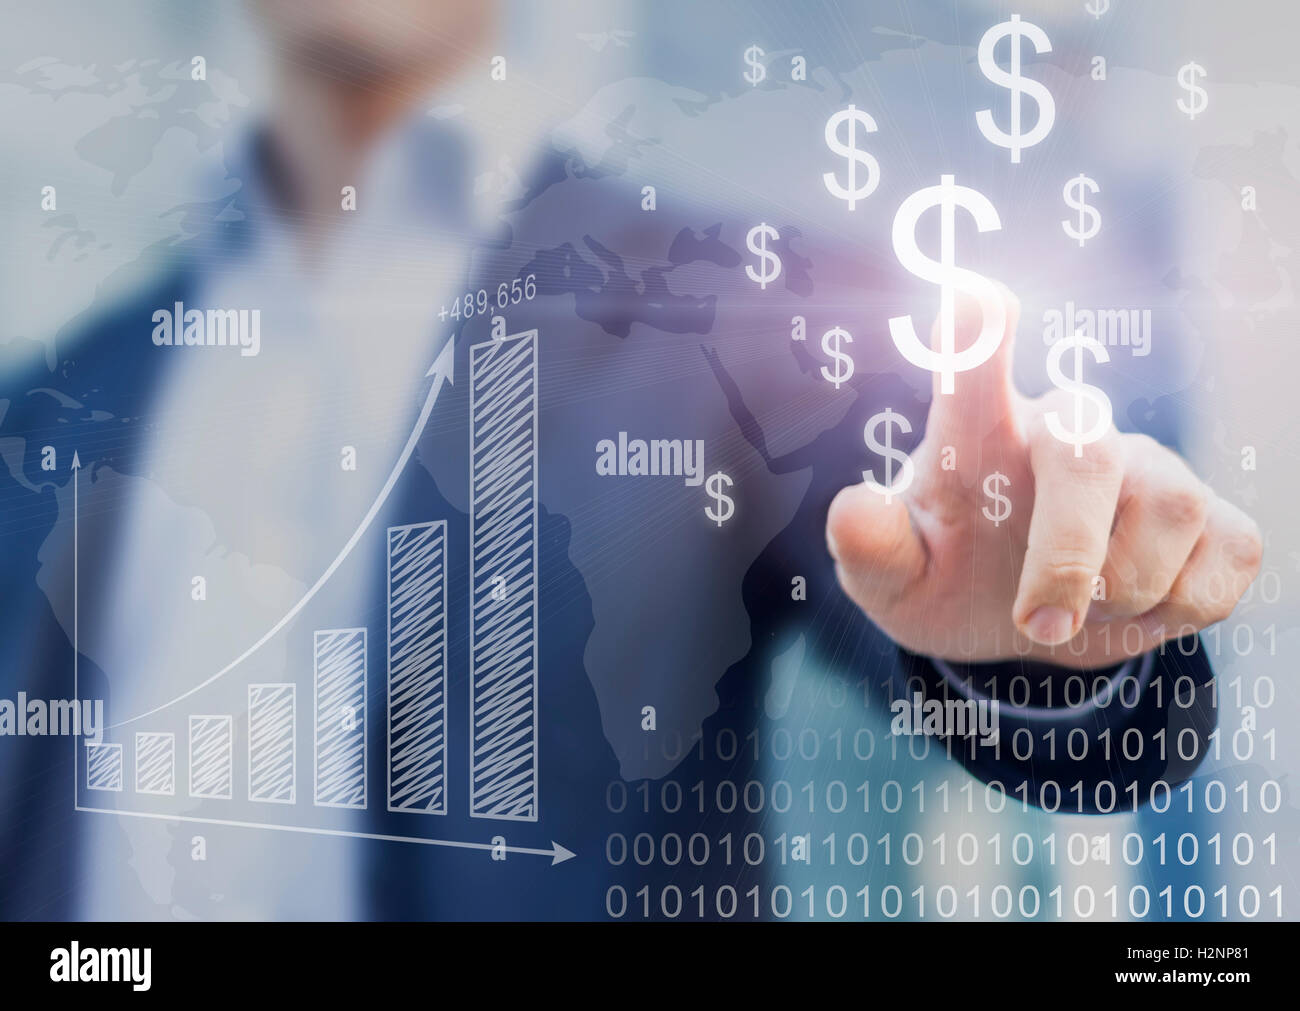 Businessman presenting financial analysis with charts generated by big data displaying international success and dollar signs Stock Photo